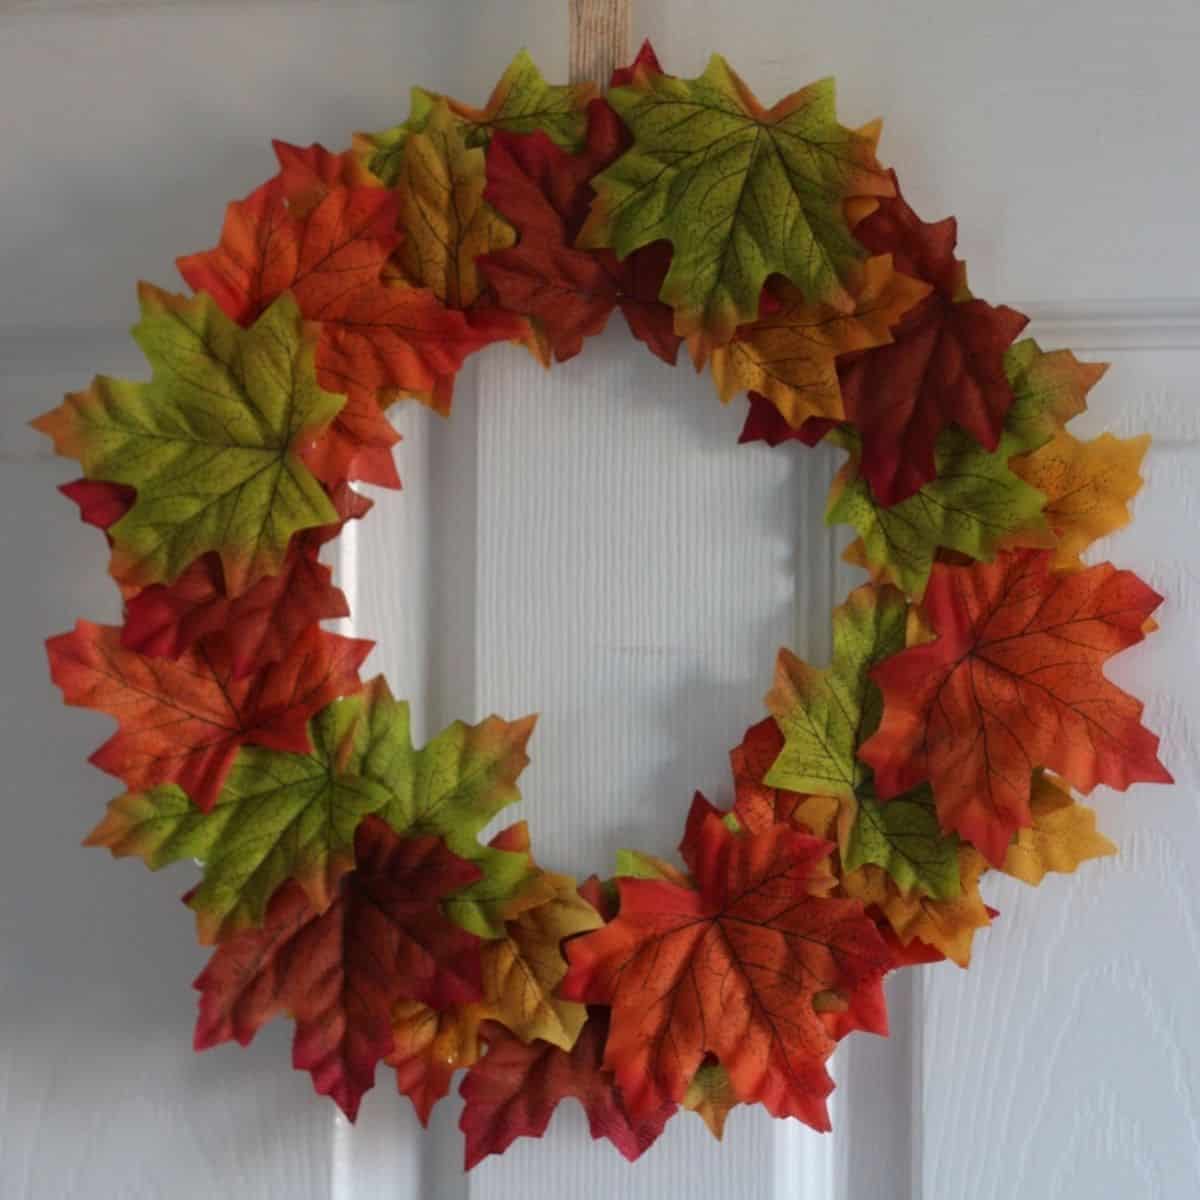 Paper plate Autumn/Fall leaf wreath hanging on a door.